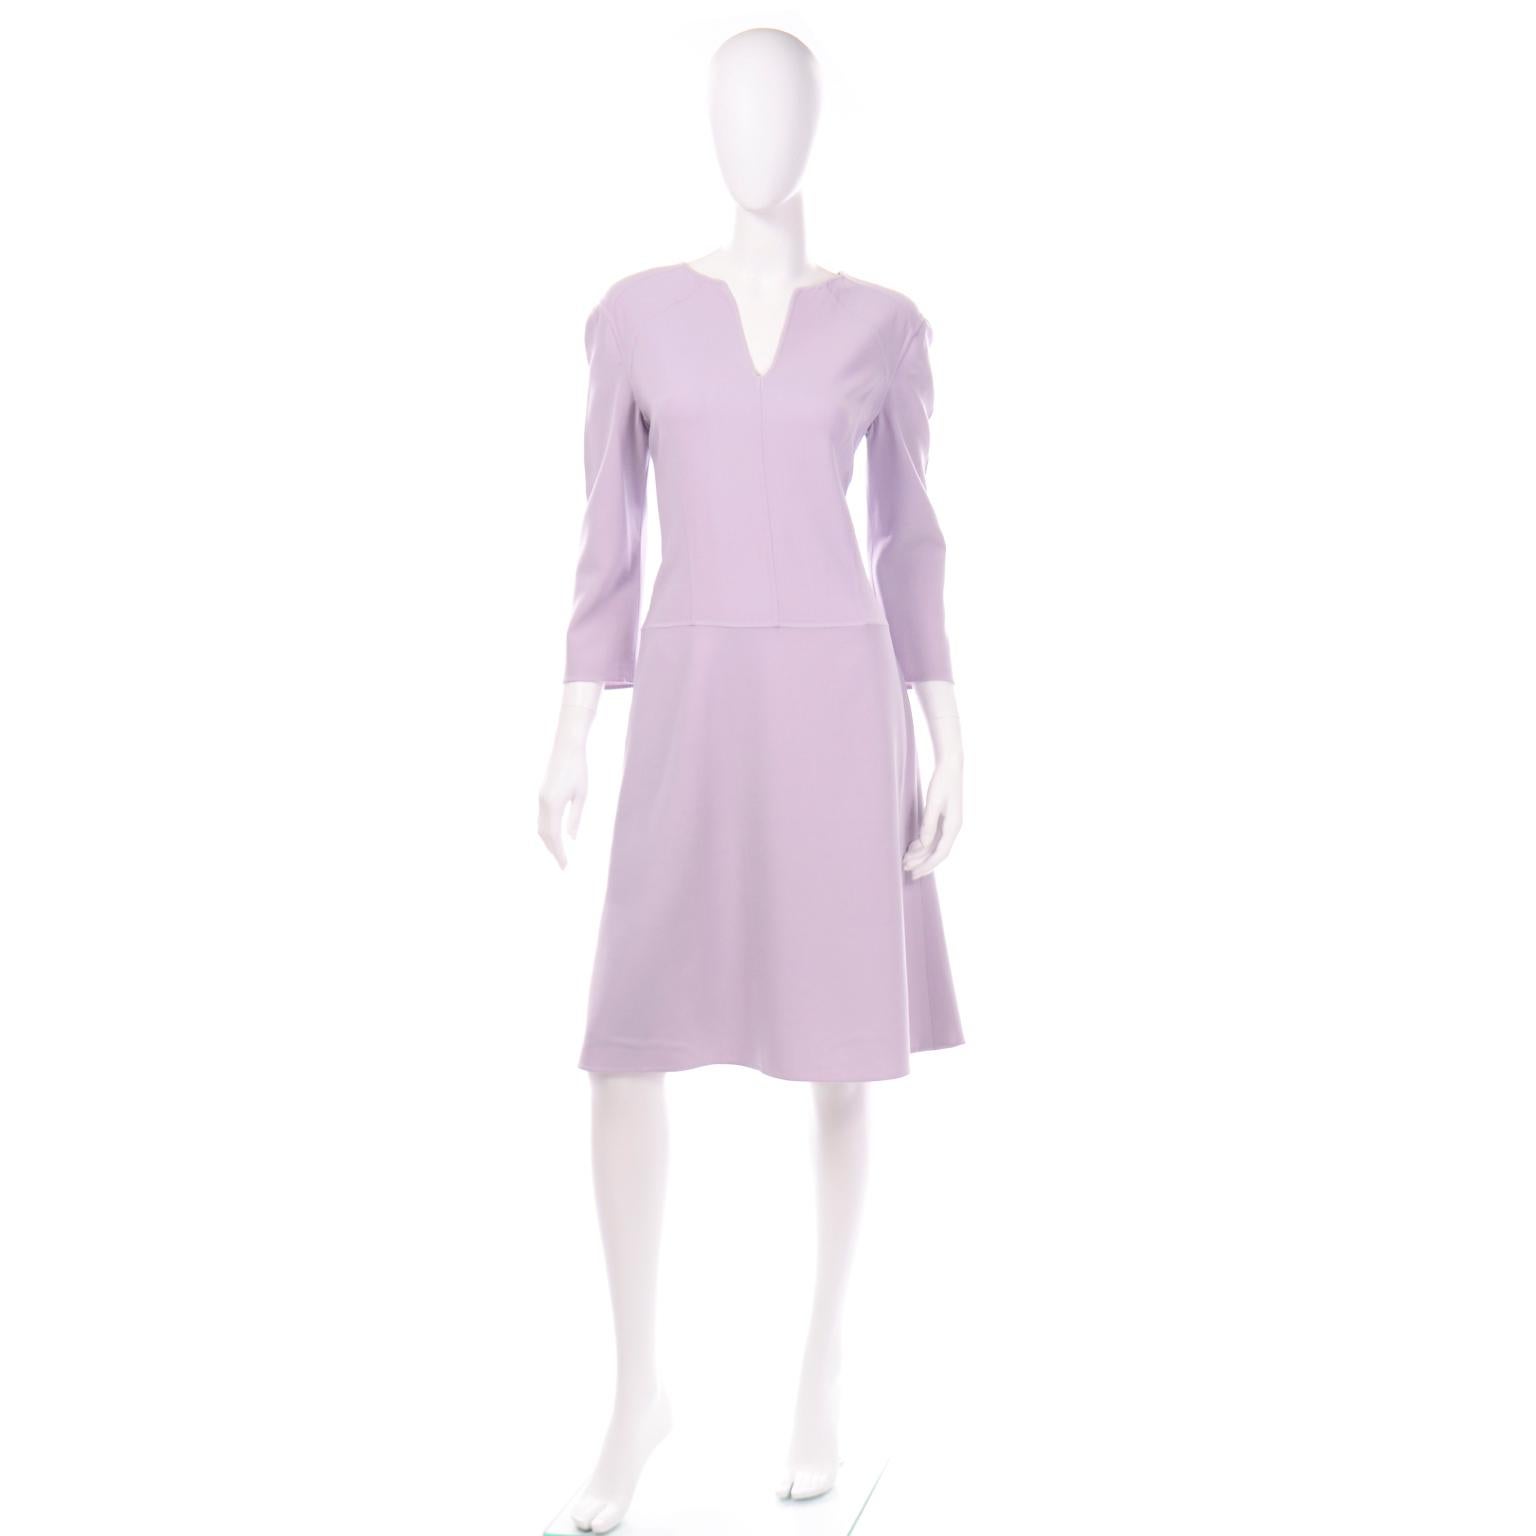 This is a beautiful lavender summer weight wool Carolina Herrera long sleeve dress. The silhouette of this dress is so nicely structured and there is a slight drop waist. The sleeves are slightly cropped depending on your height. This timeless dress